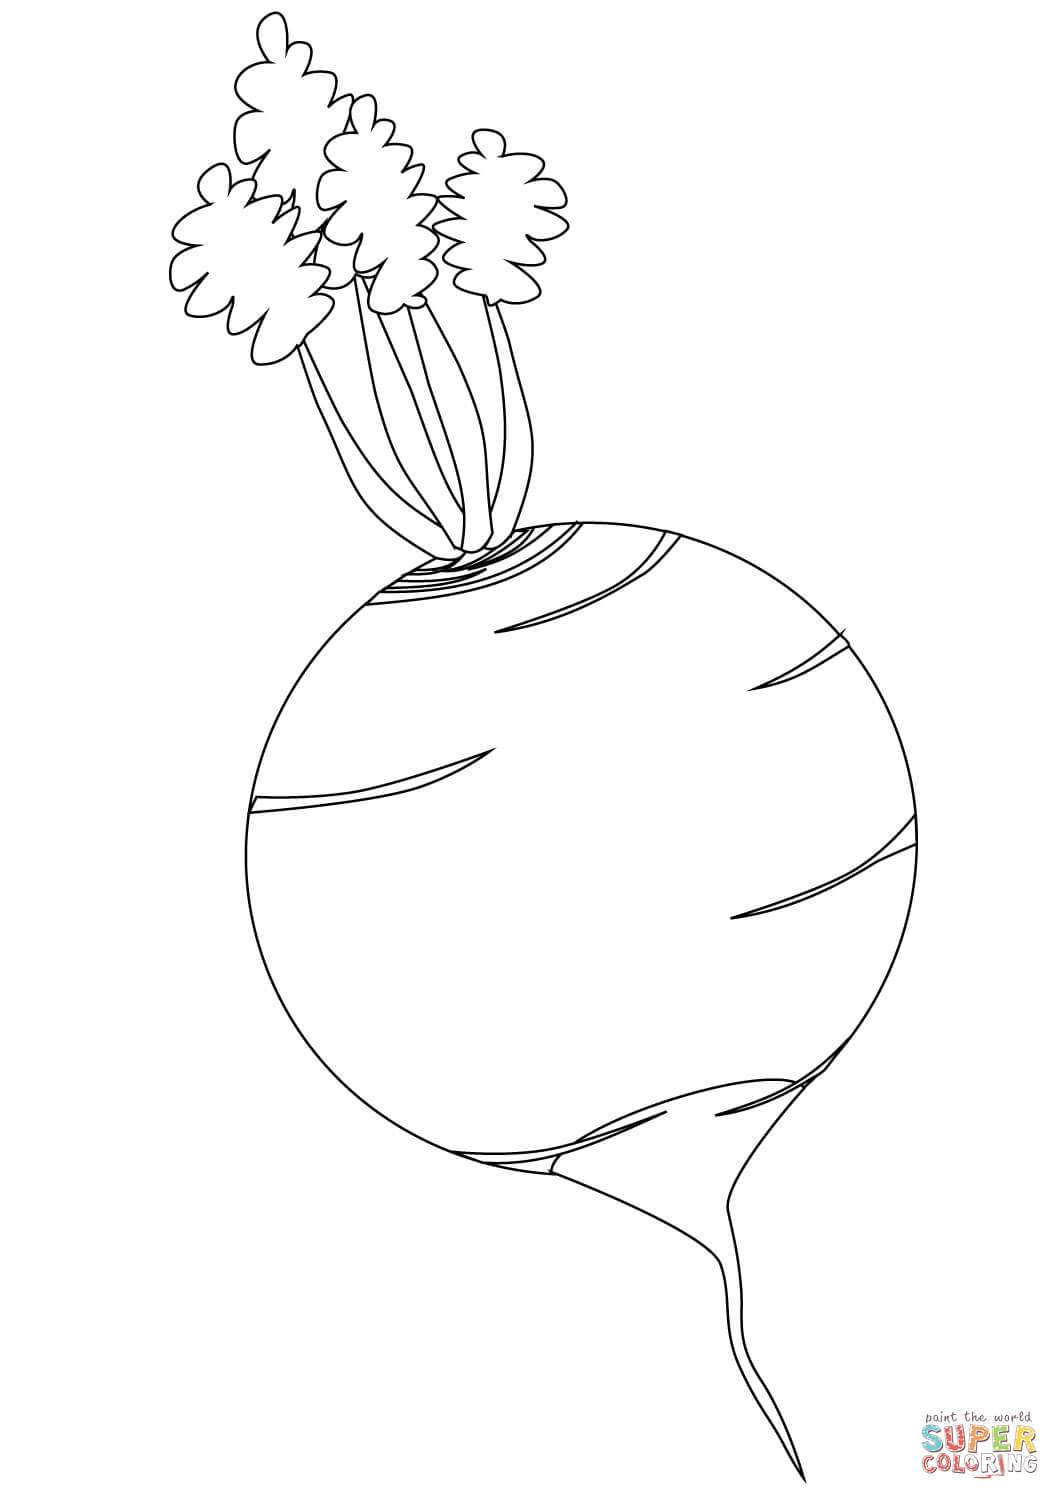 Turnip Coloring Page Turnip Coloring Page Free Printable Coloring Pages